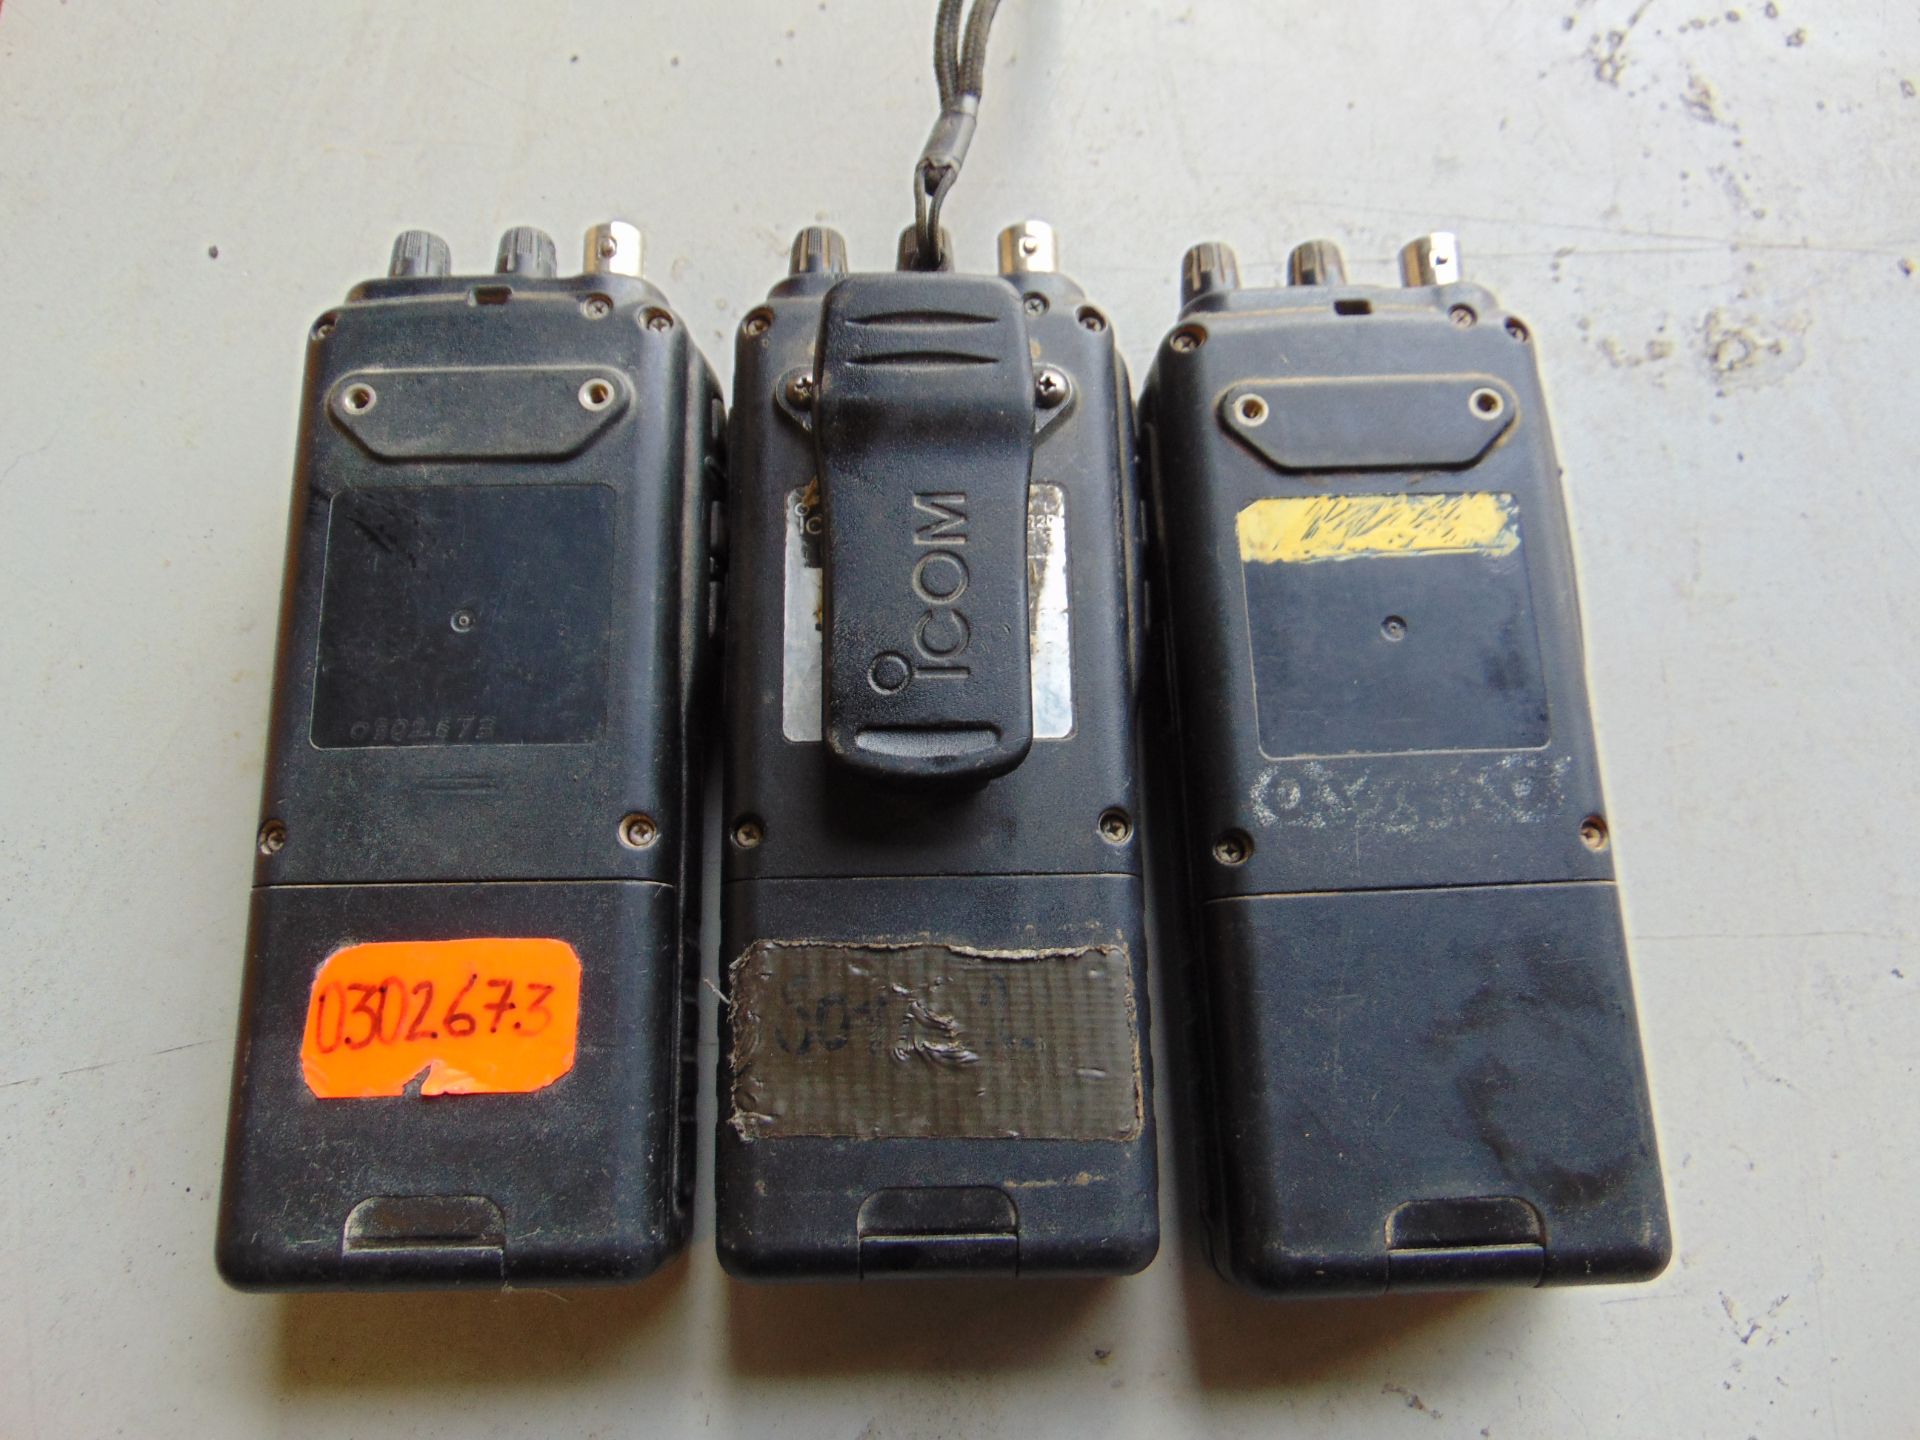 3 x ICOM R20 Coms Receivers Hand Held as shown - Image 5 of 5